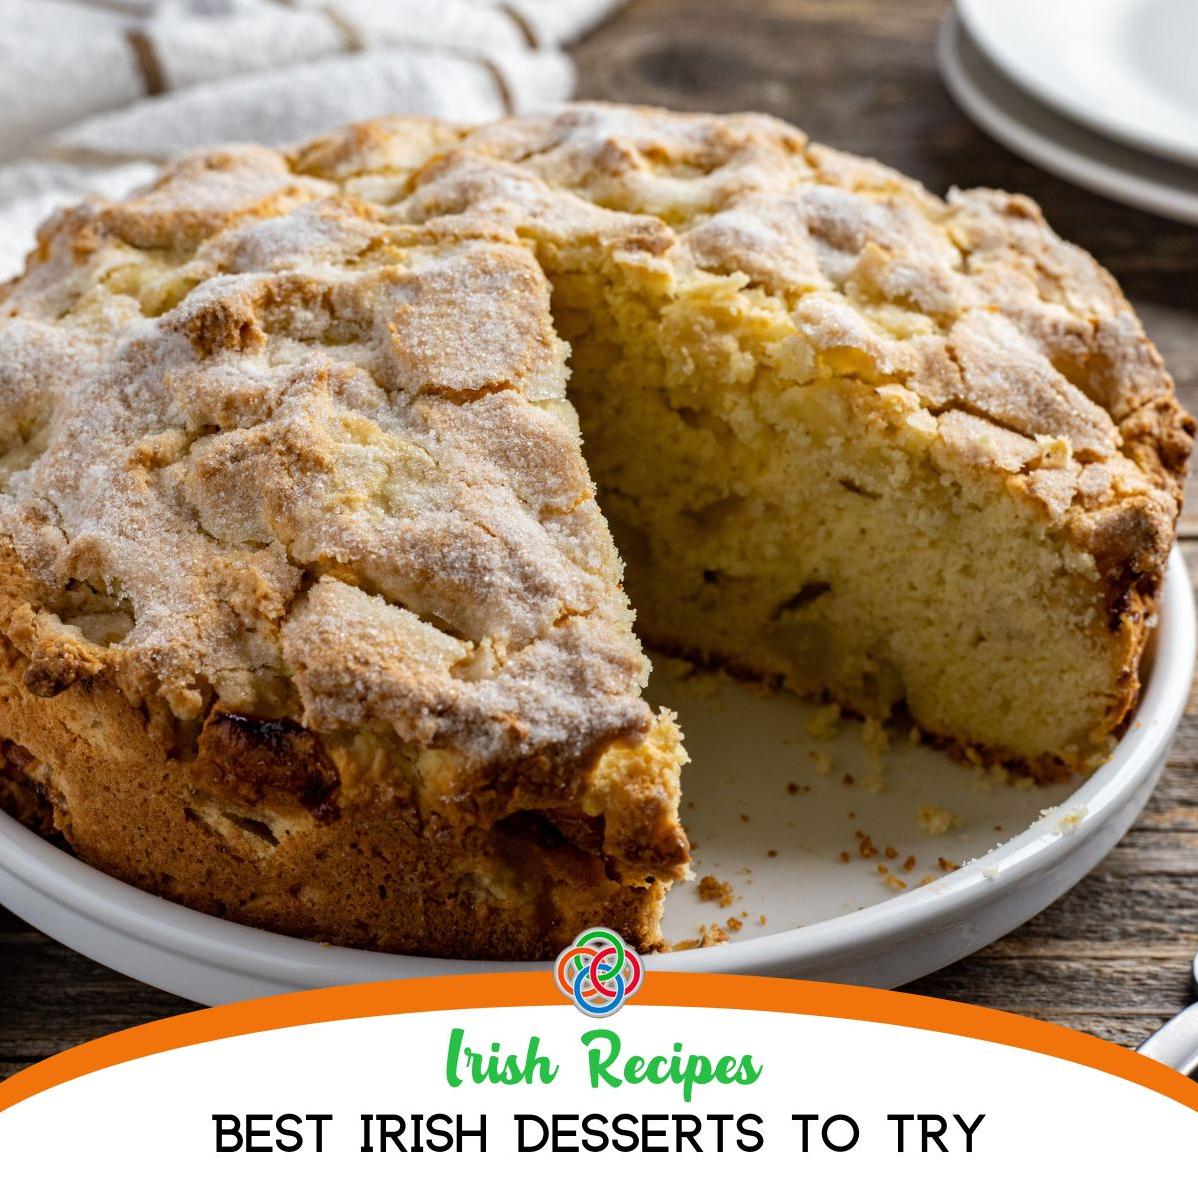 Scrumptious Irish Dessert Recipe for Sweet-Toothed Foodies